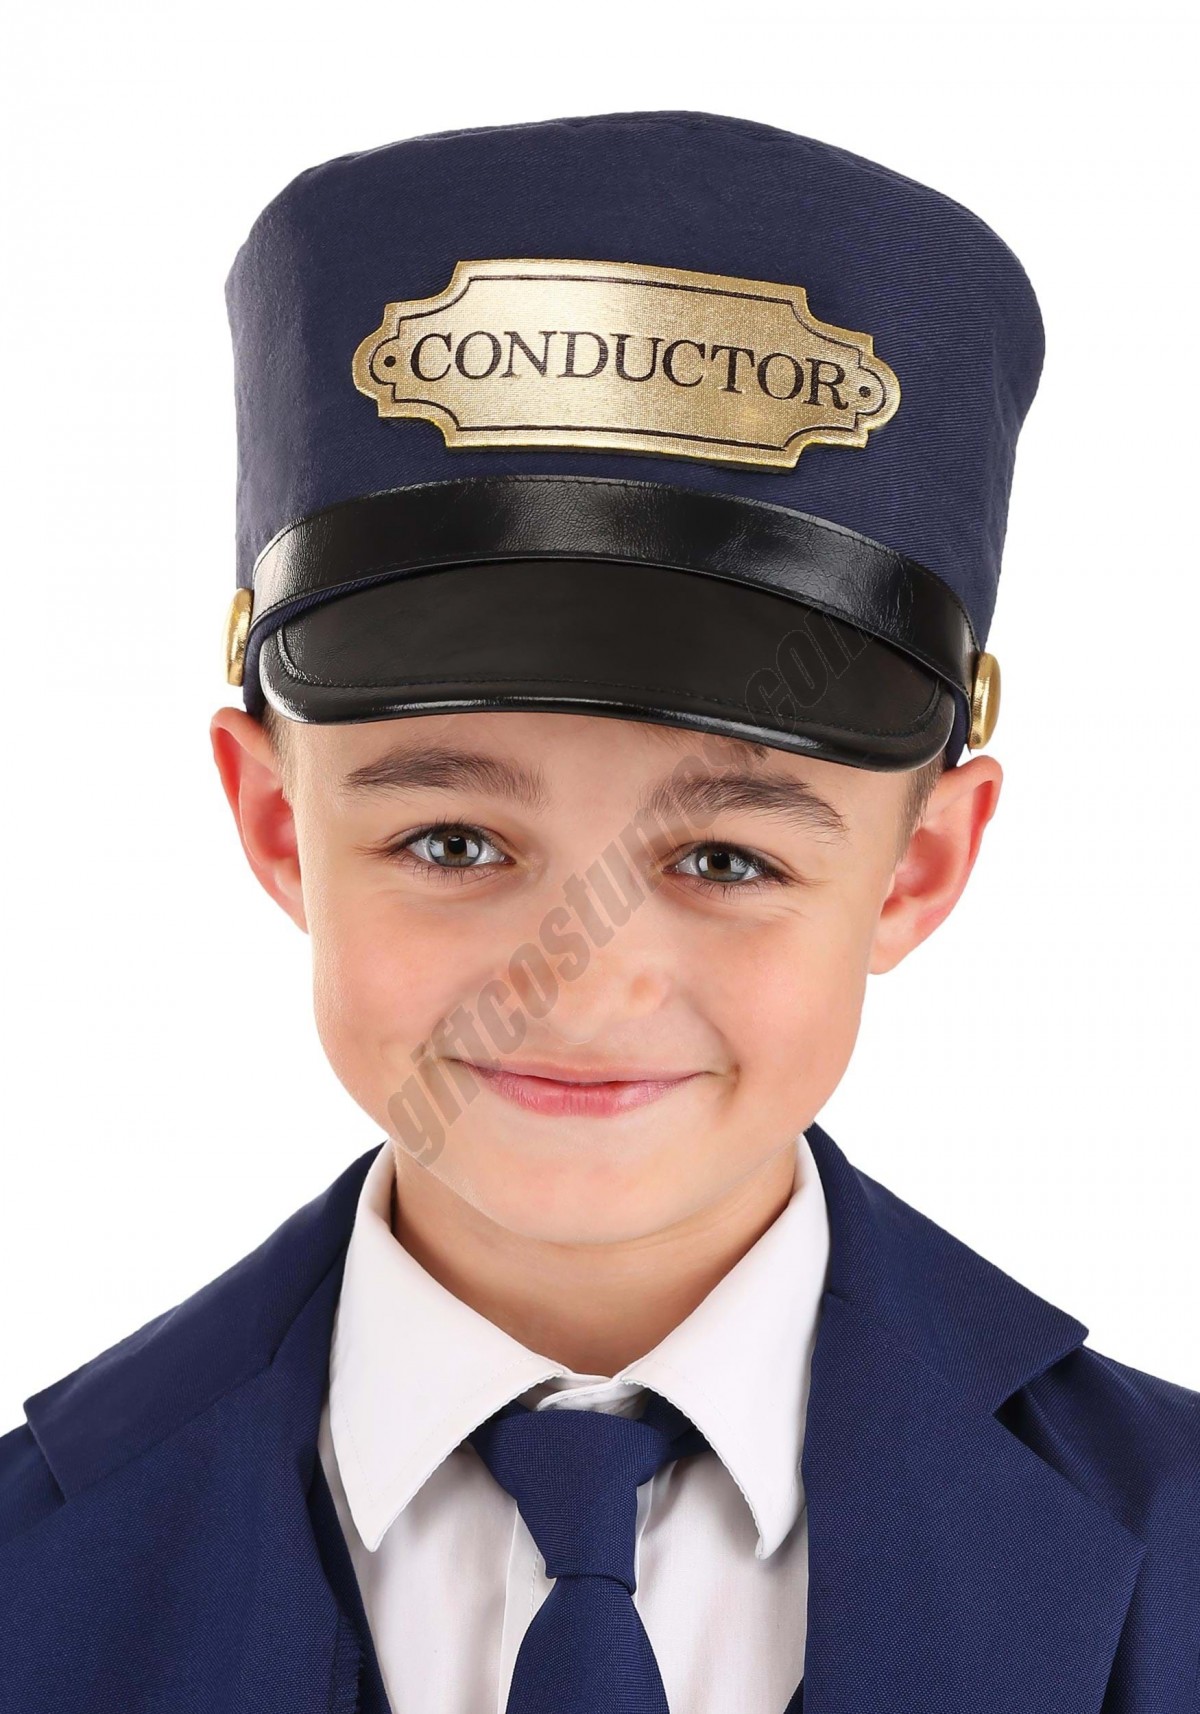 Train Conductor Hat for Kids Promotions - -0